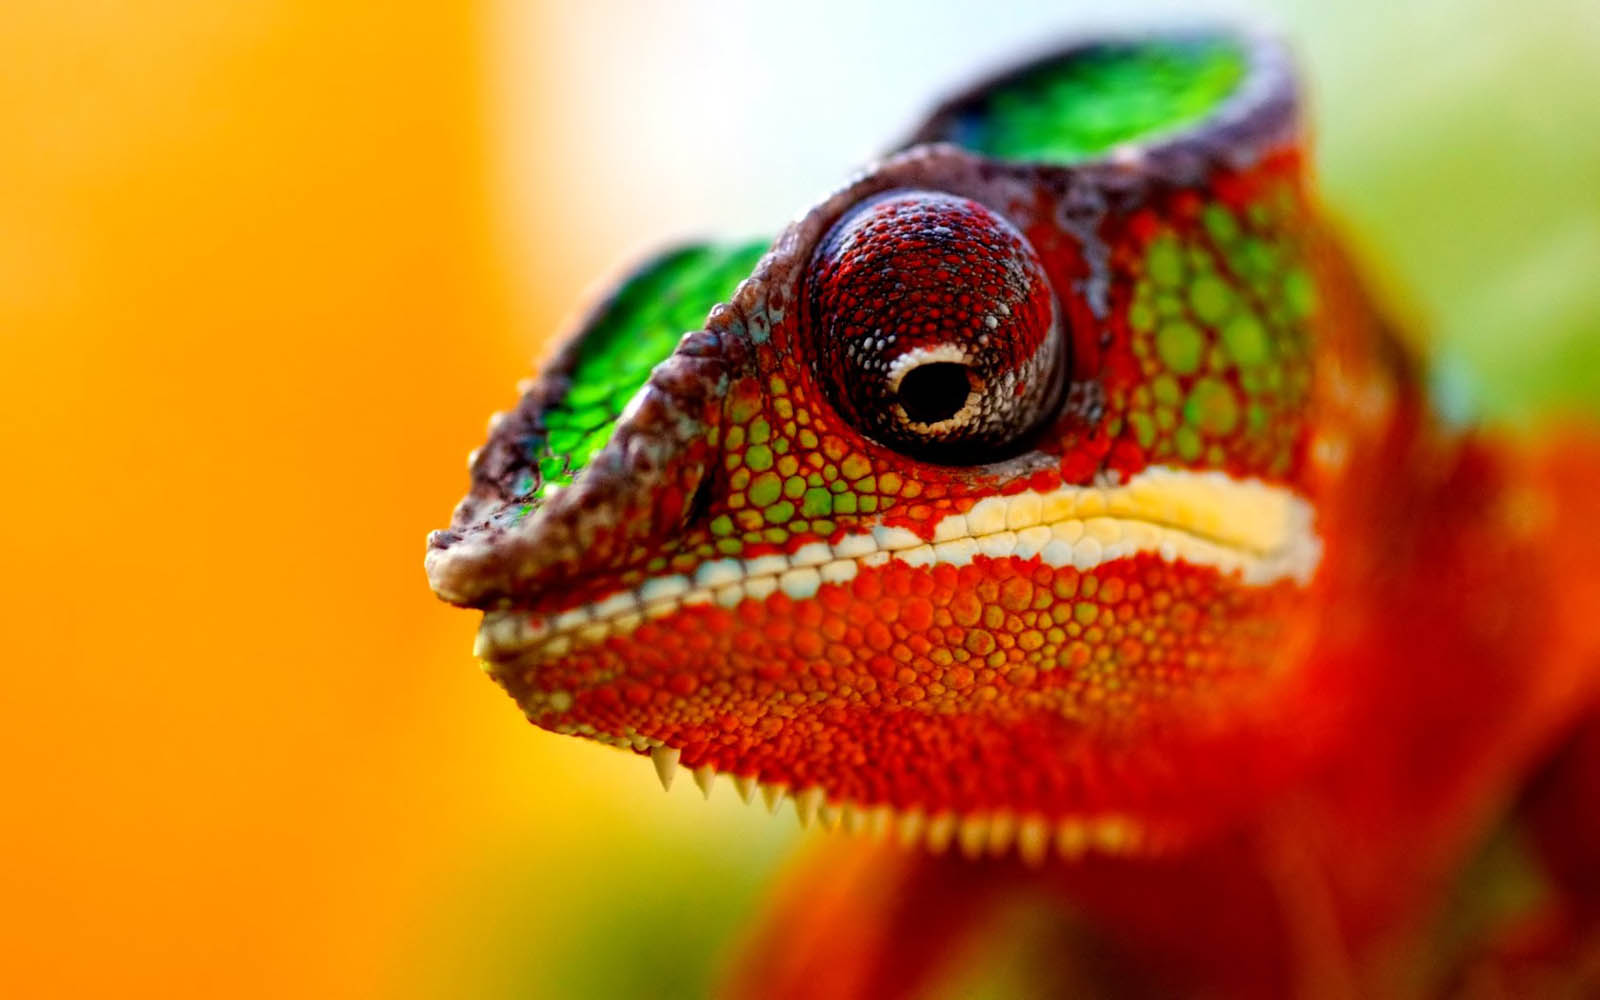 Chameleon Photos Download The BEST Free Chameleon Stock Photos  HD Images